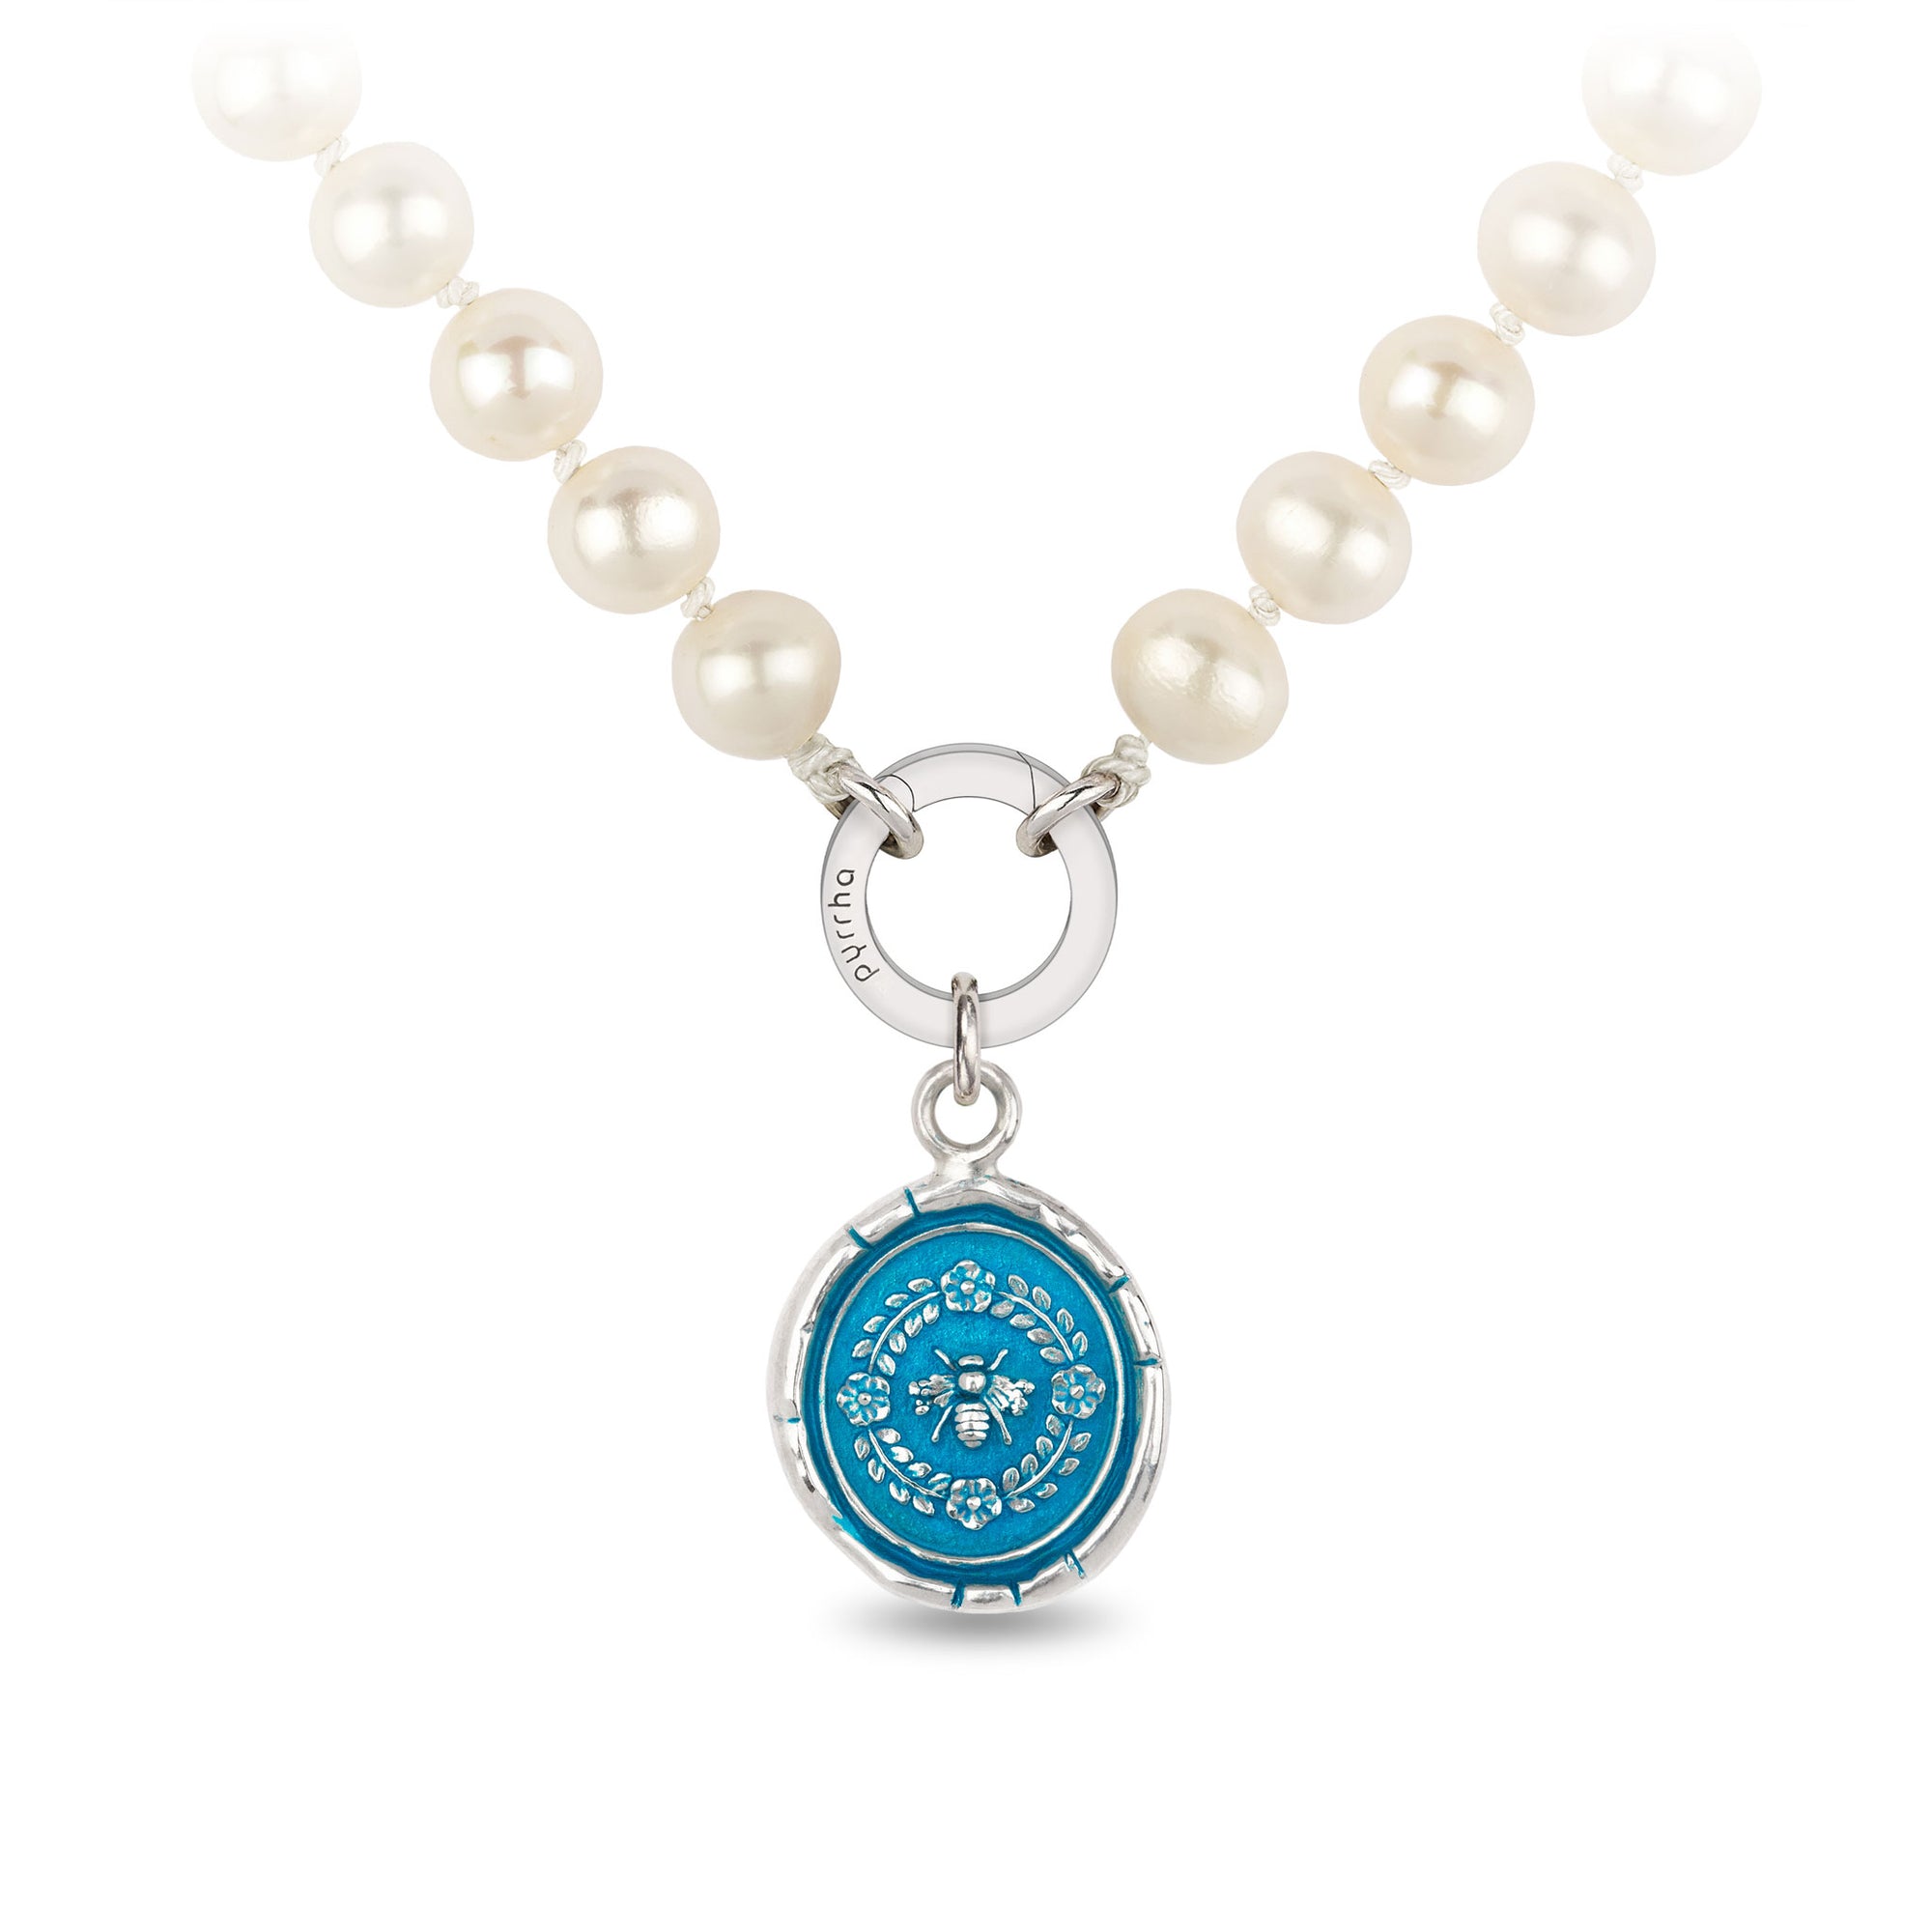 Honeybee Knotted Freshwater Pearl Necklace - Capri Blue